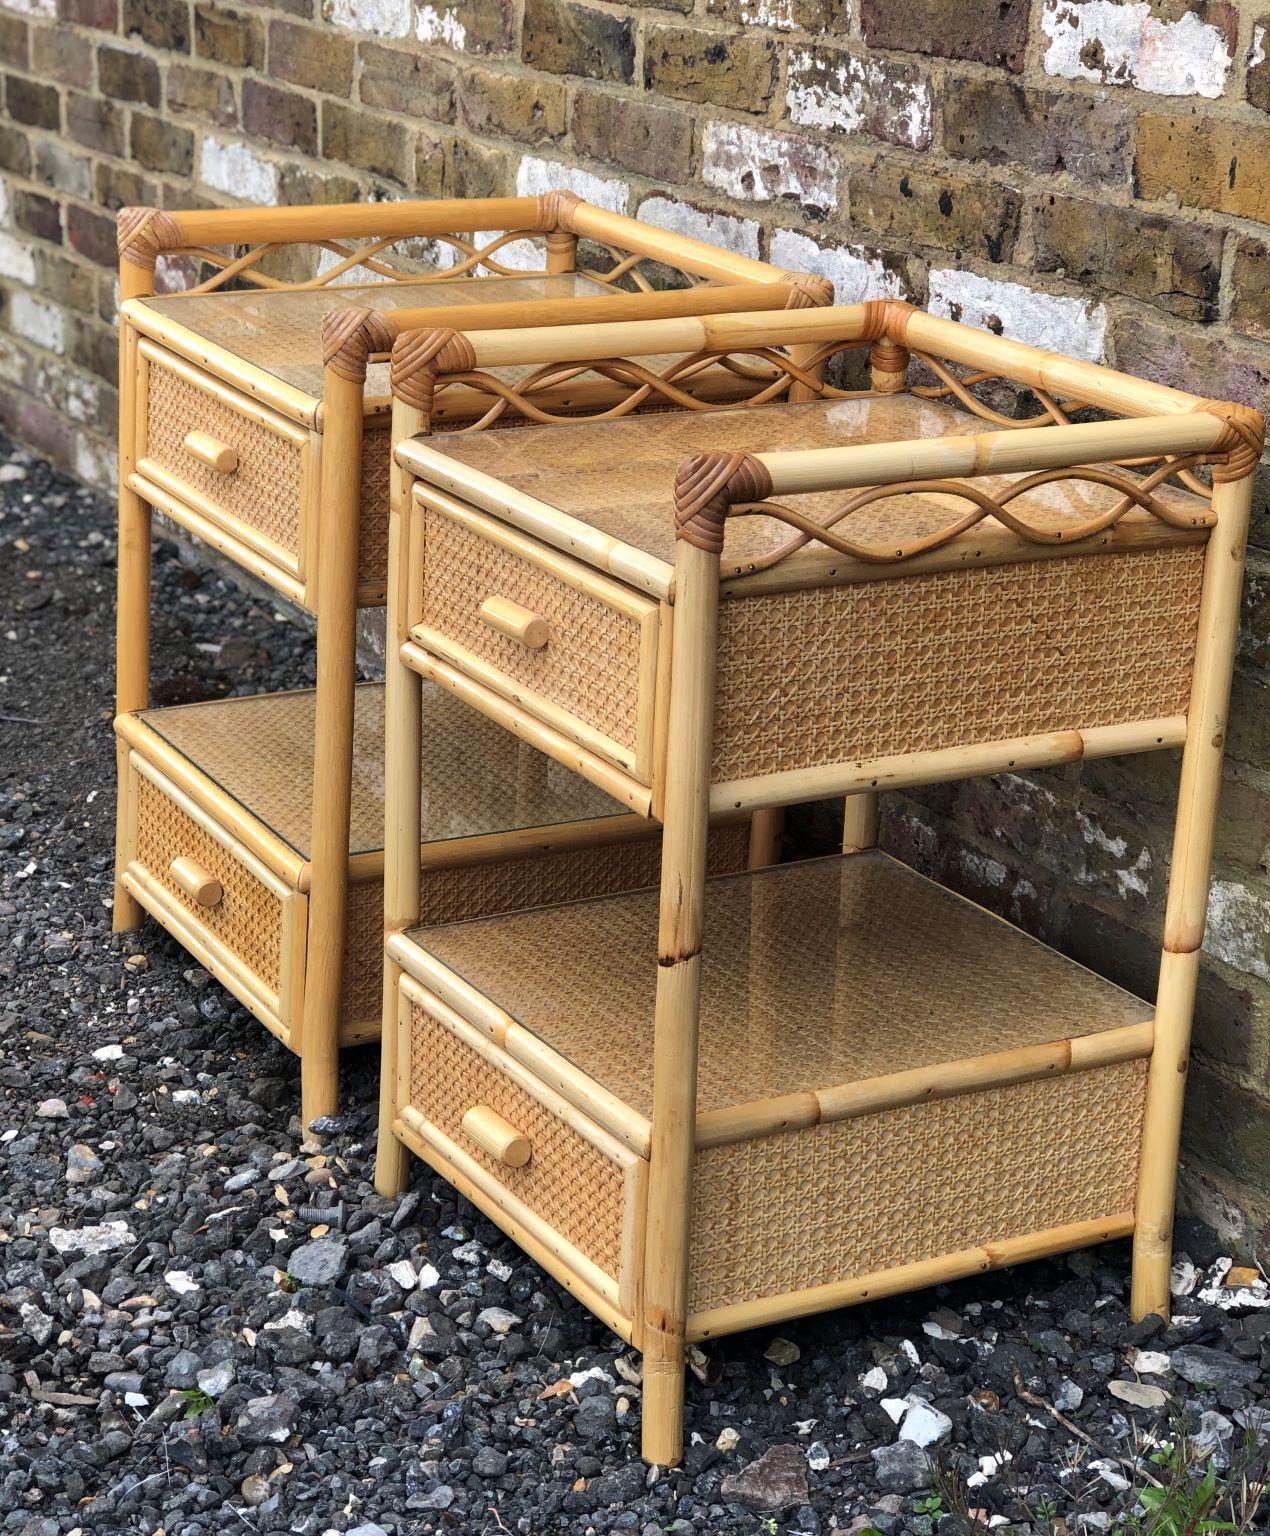 Pair of Mid Century rattan / cane nightstands / bedside tables by English company, Angraves, England, 1970s.

Each nightstand has 2 x drawers with cane handles, with a void in between the two, they are covered in cane weave matting, and each have 2